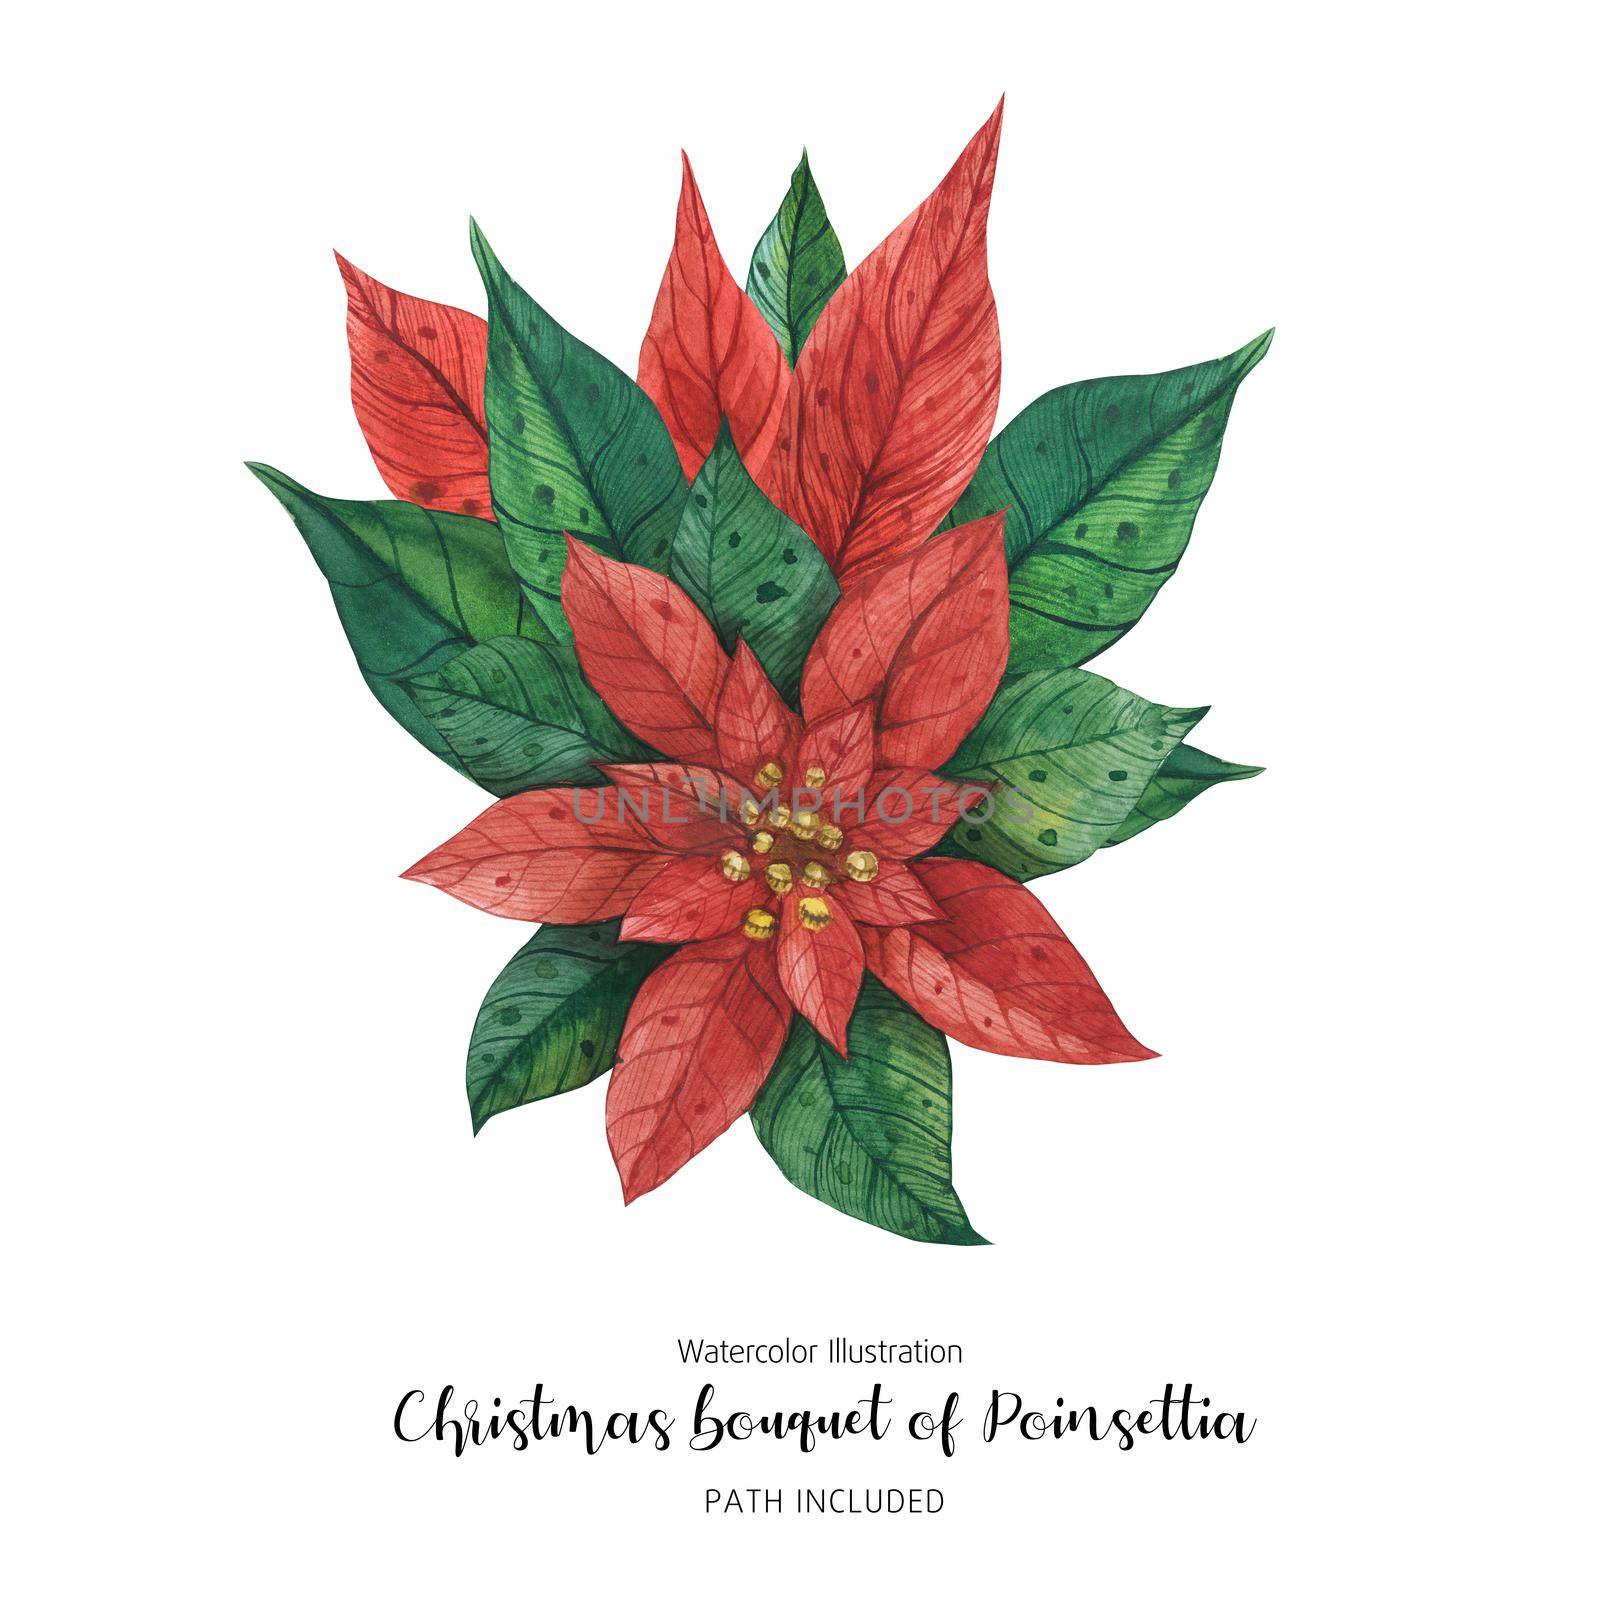 Poinsettia Christmas Floral Bouquet, watercolor hand-made illustration